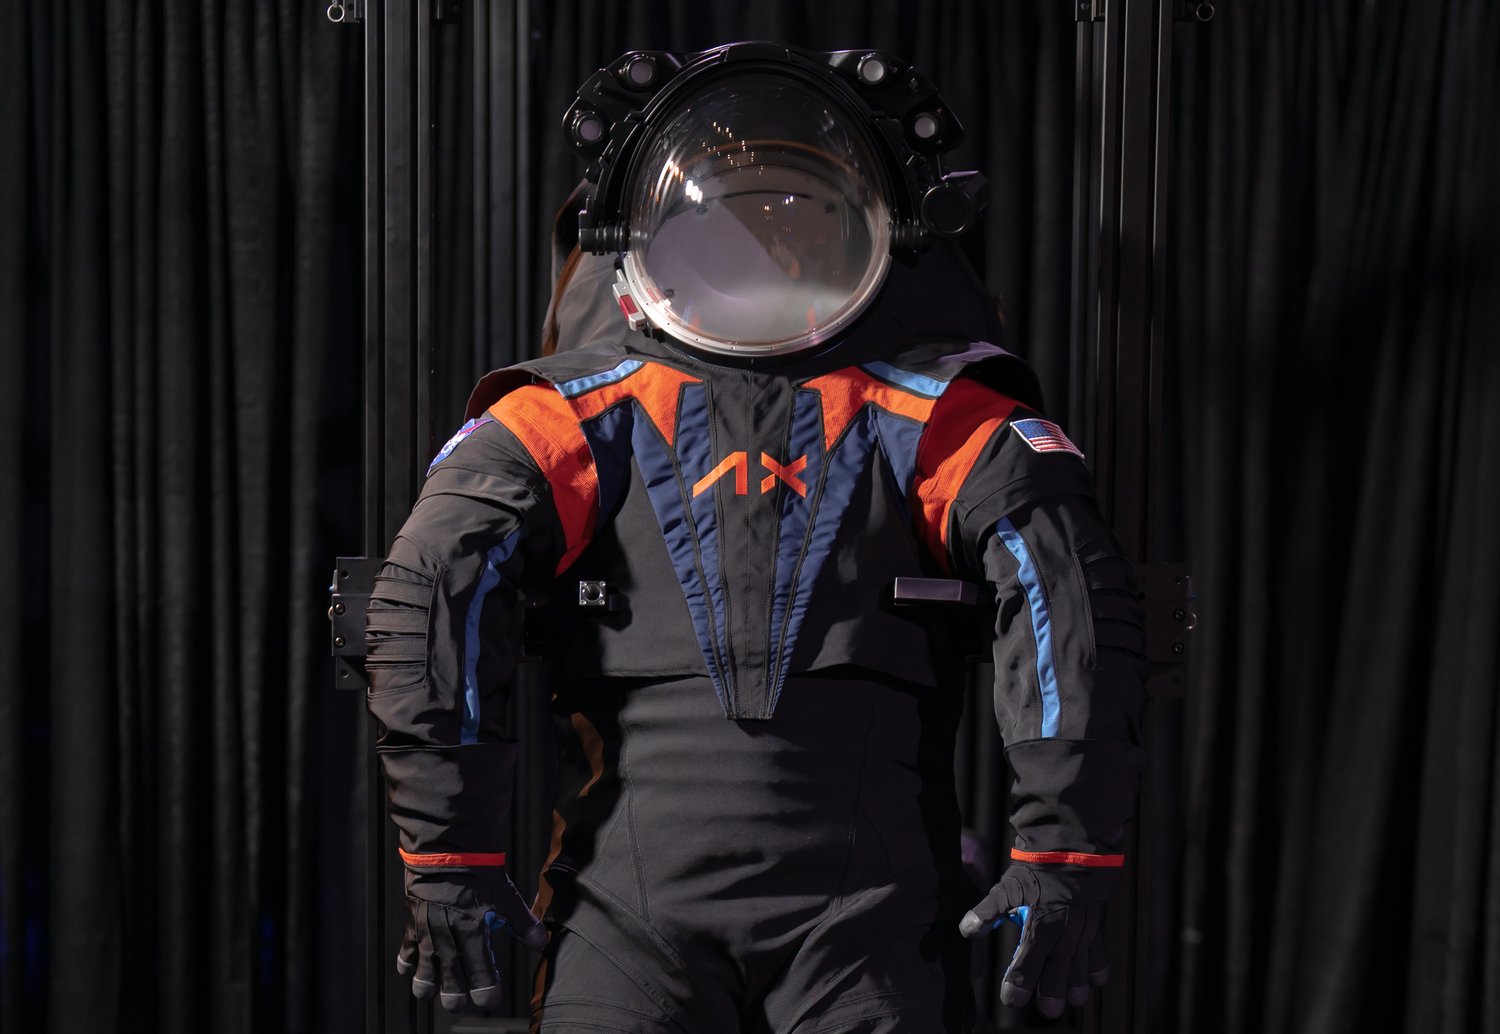 Picture of the Day: Axiom unveils new astronaut spacesuit for Moon landings